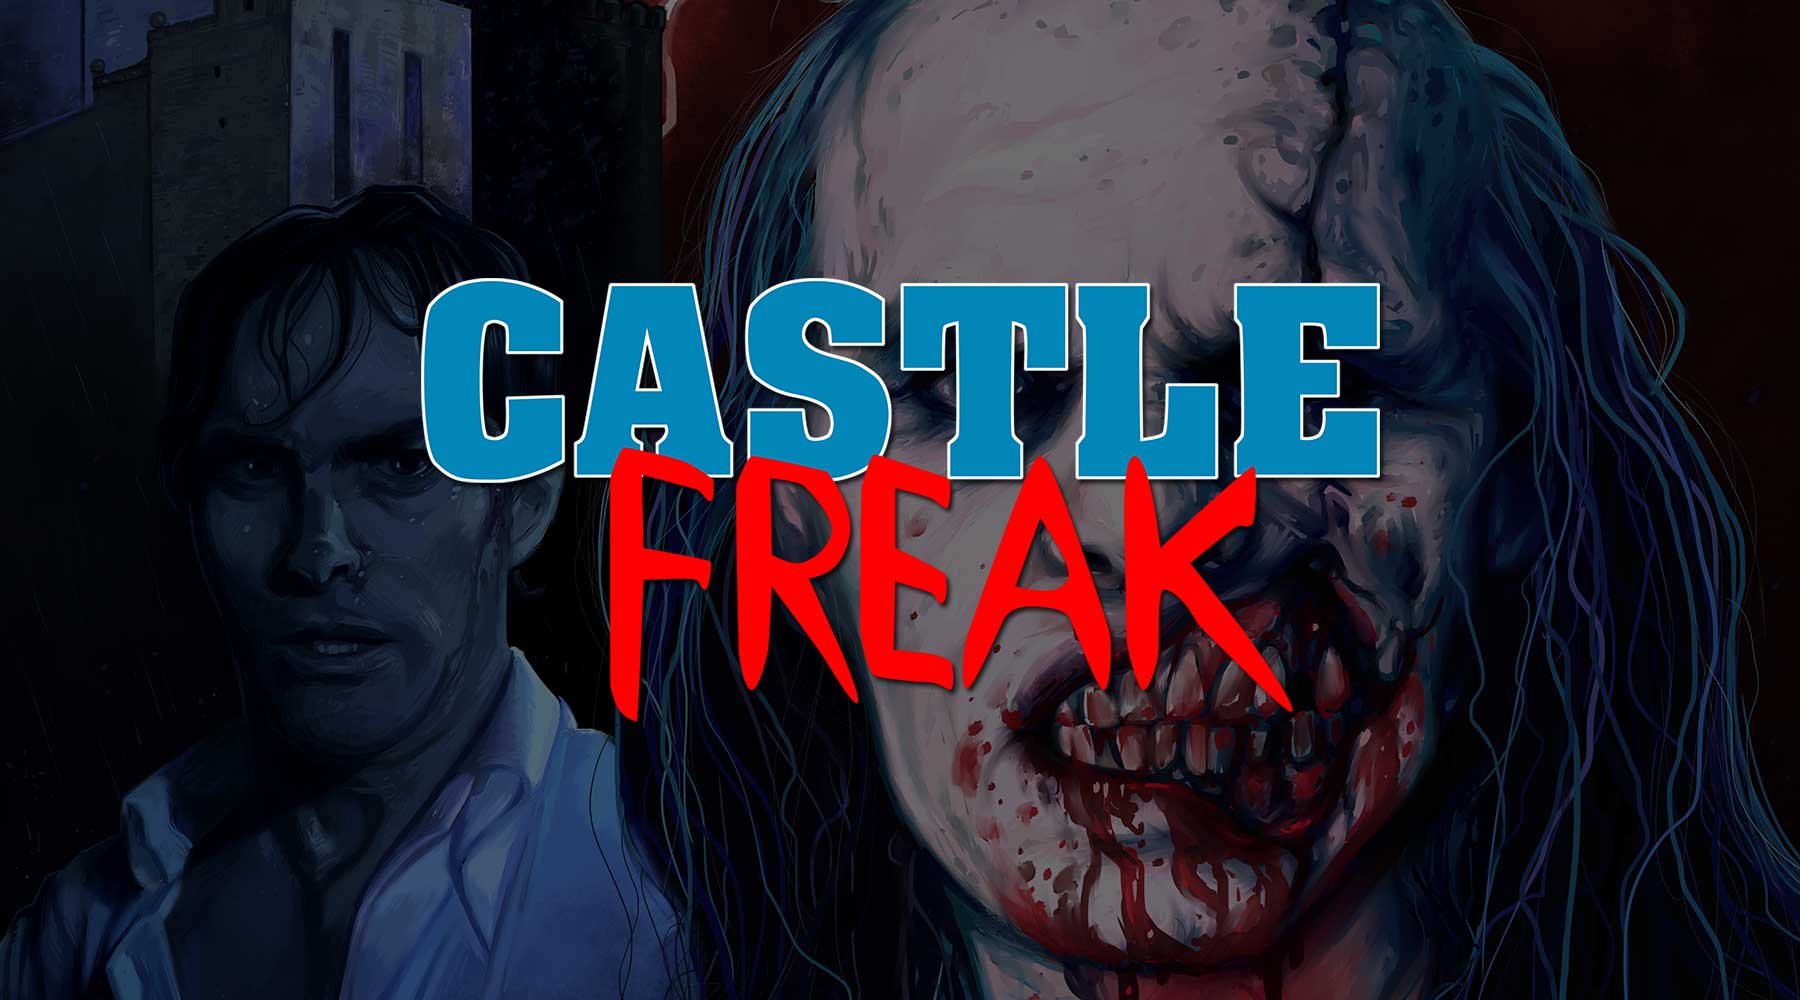 Officially Licensed CASTLE FREAK Enamel Pins, T-Shirts & Art Prints Now Available